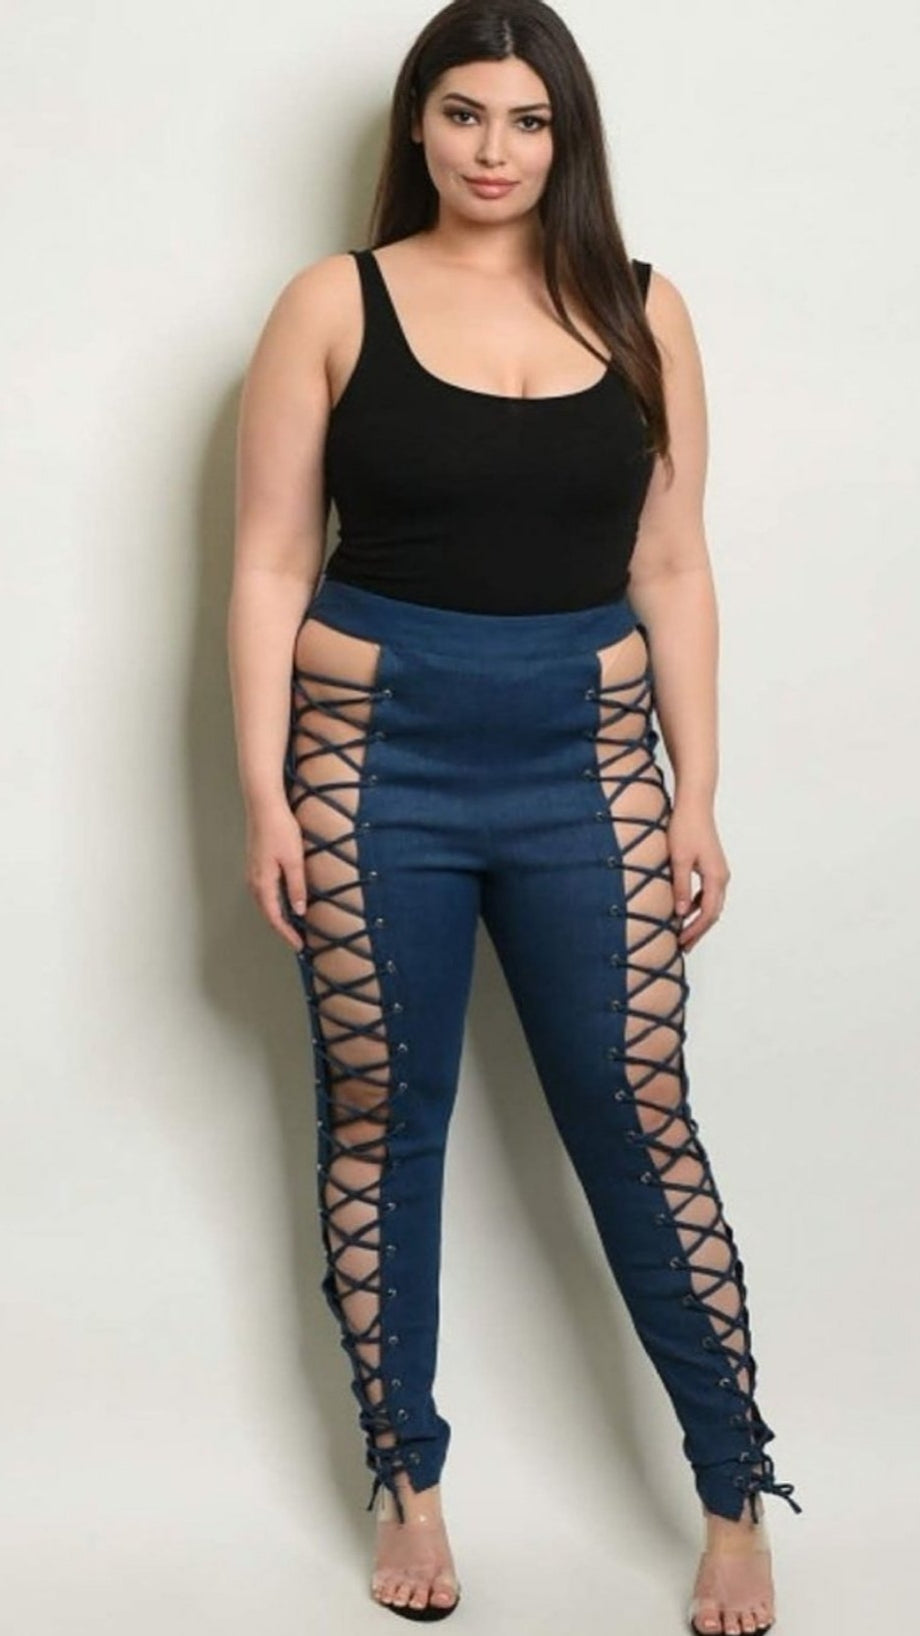 Mid-Size Lace Up Sexy Denim